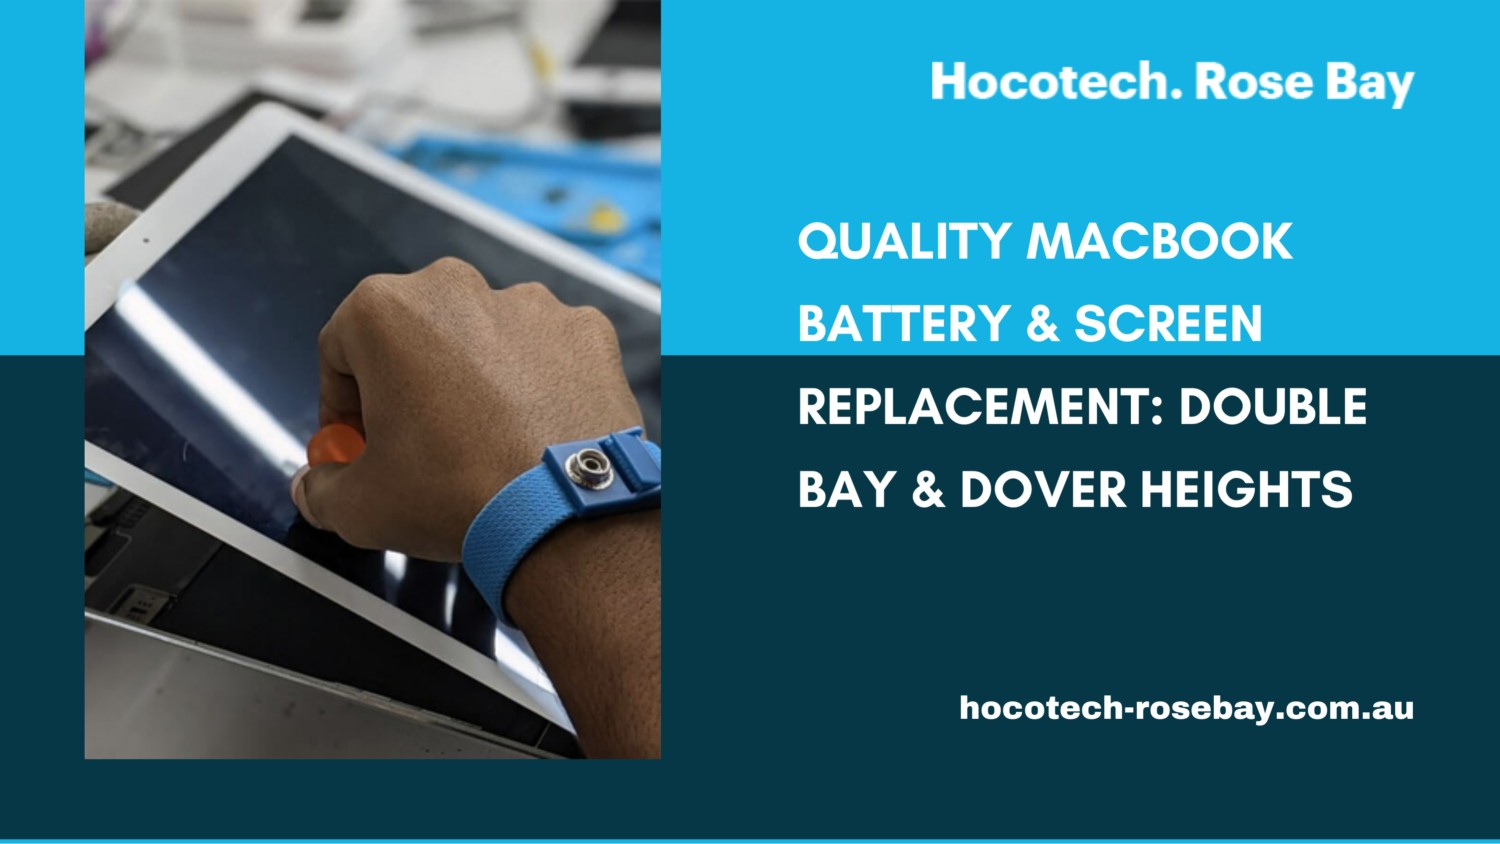 Quality Macbook Battery & Screen Replacement Double Bay & Dover Heights